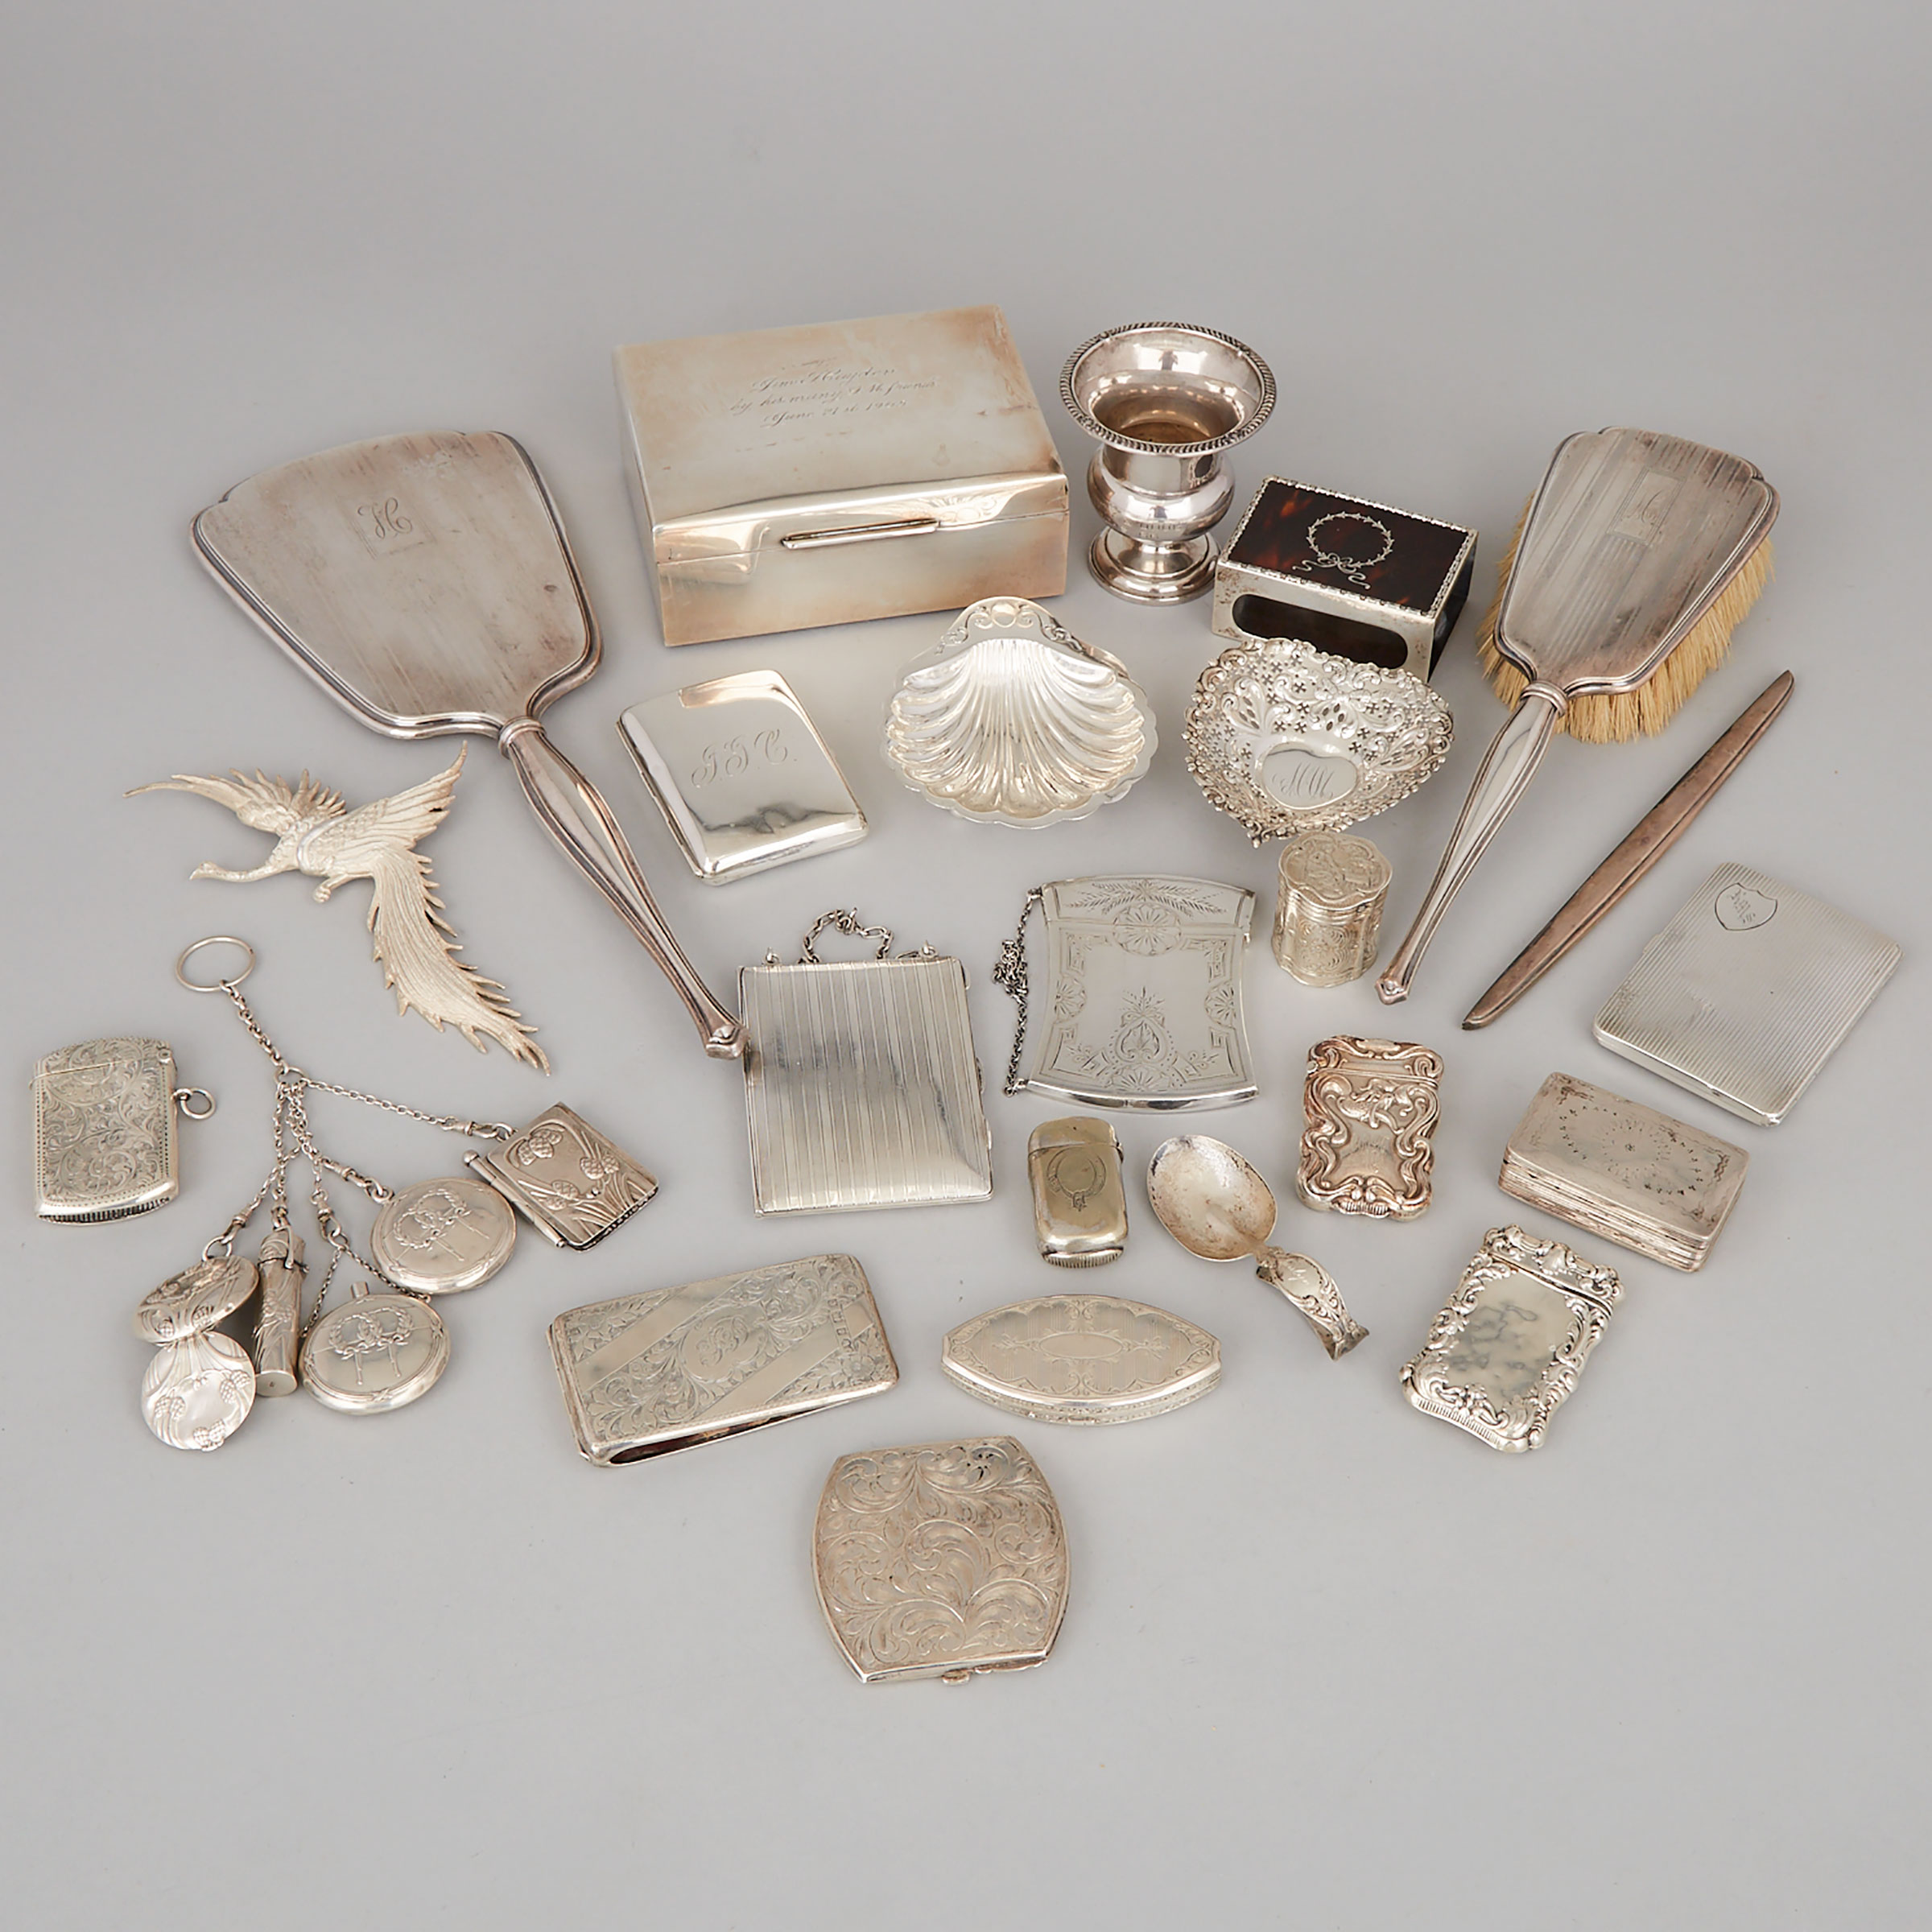 Group of North American, English and Continental Silver Boxes and Other Small Articles, late 19th/20th century